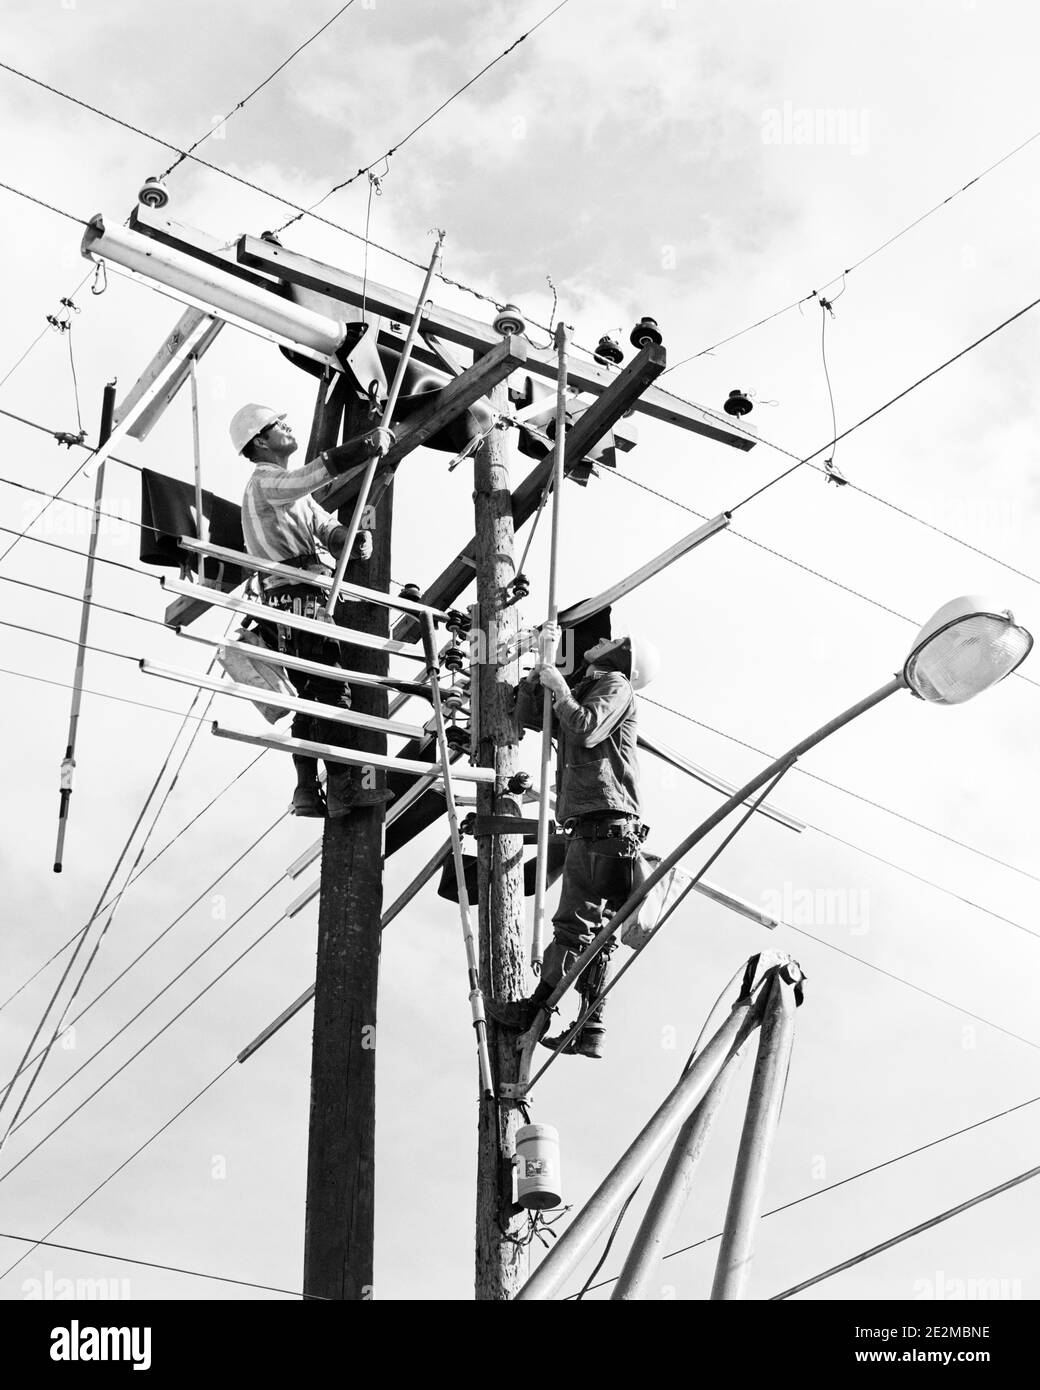 1960s TWO MEN WORKING ON PUBLIC UTILITY ELECTRICAL WIRES AT TOP OF POWER POLES - i5376 HAR001 HARS PROTECTION LABOR EMPLOYMENT LINES OCCUPATIONS MAINTENANCE UTILITY EMPLOYEE LINEMAN STREET LAMP LINEMEN MID-ADULT MID-ADULT MAN YOUNG ADULT MAN BLACK AND WHITE CAUCASIAN ETHNICITY HAR001 LABORING OLD FASHIONED POWER LINES PUBLIC UTILITY Stock Photo